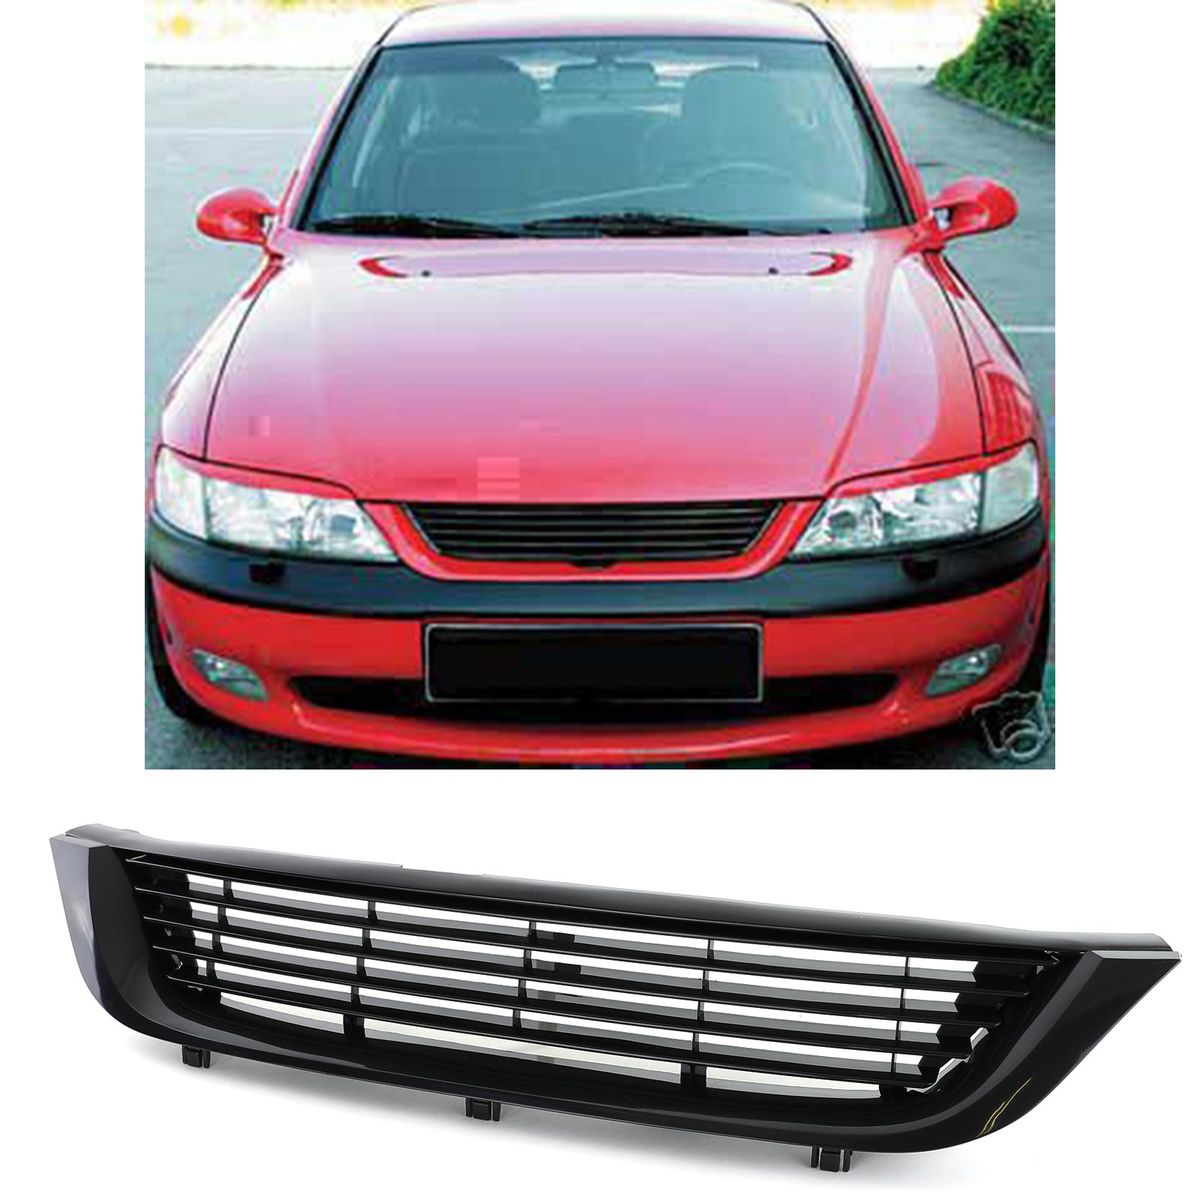 Front Grill Without Emblem for Vauxhall Opel Vectra B 95-02 black